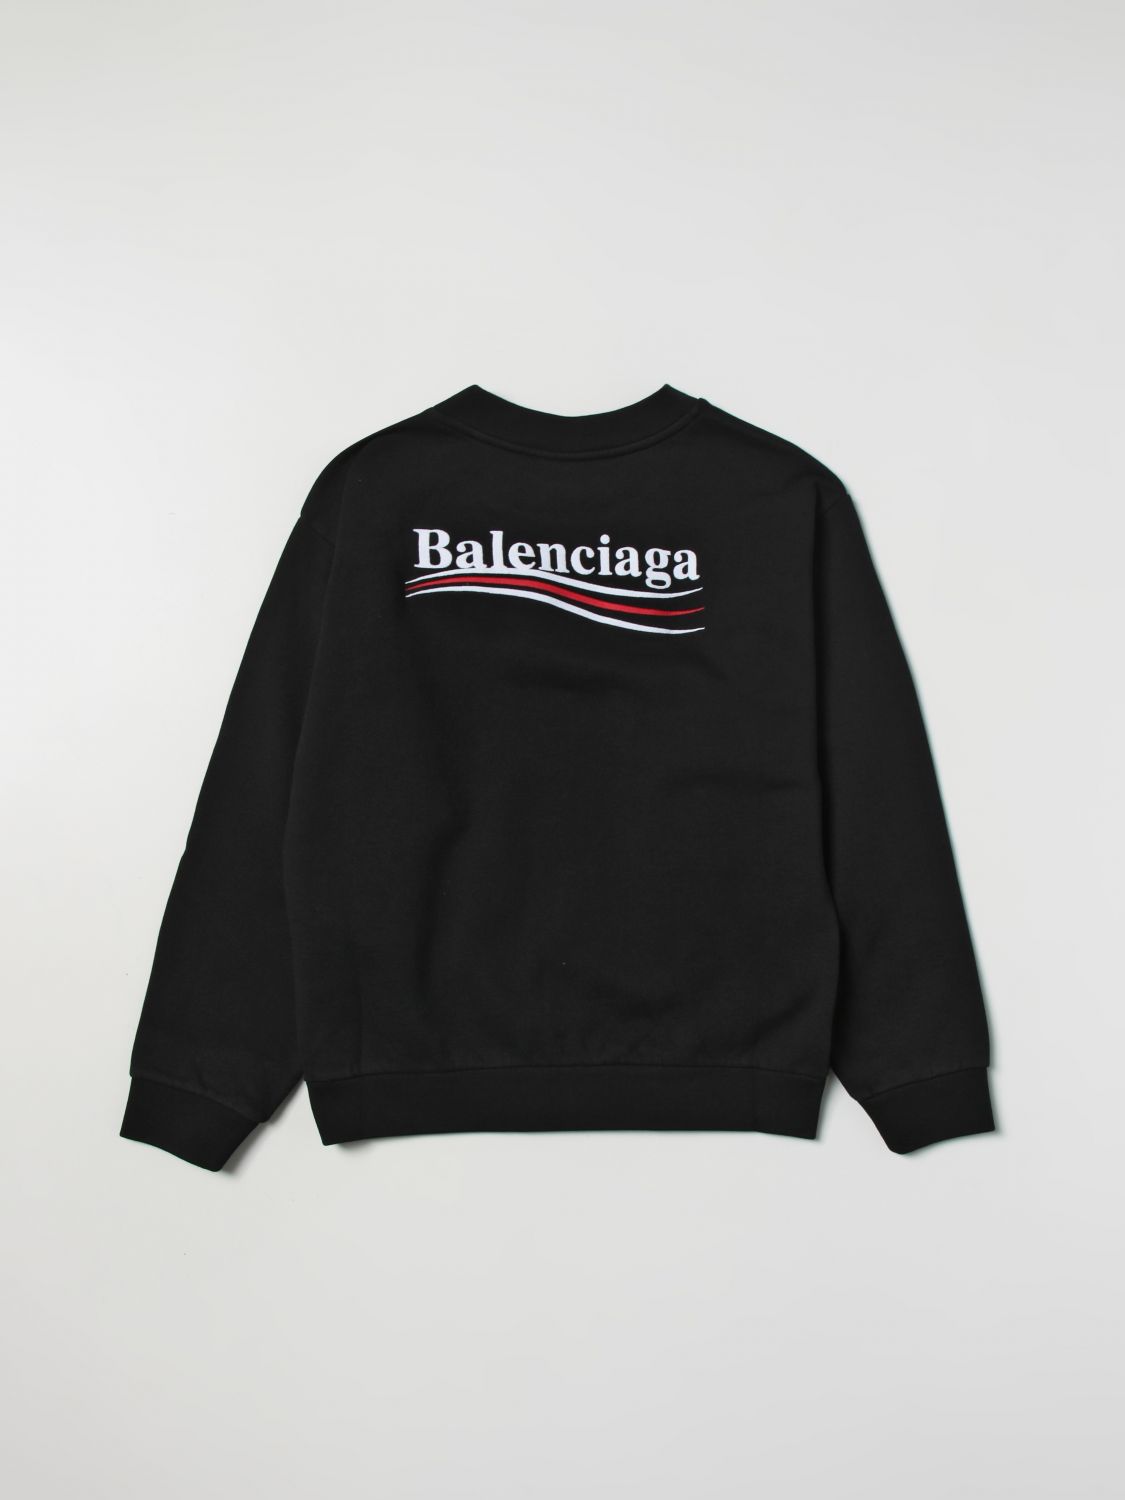 Black Pullover Puffer Coat by Balenciaga on Sale